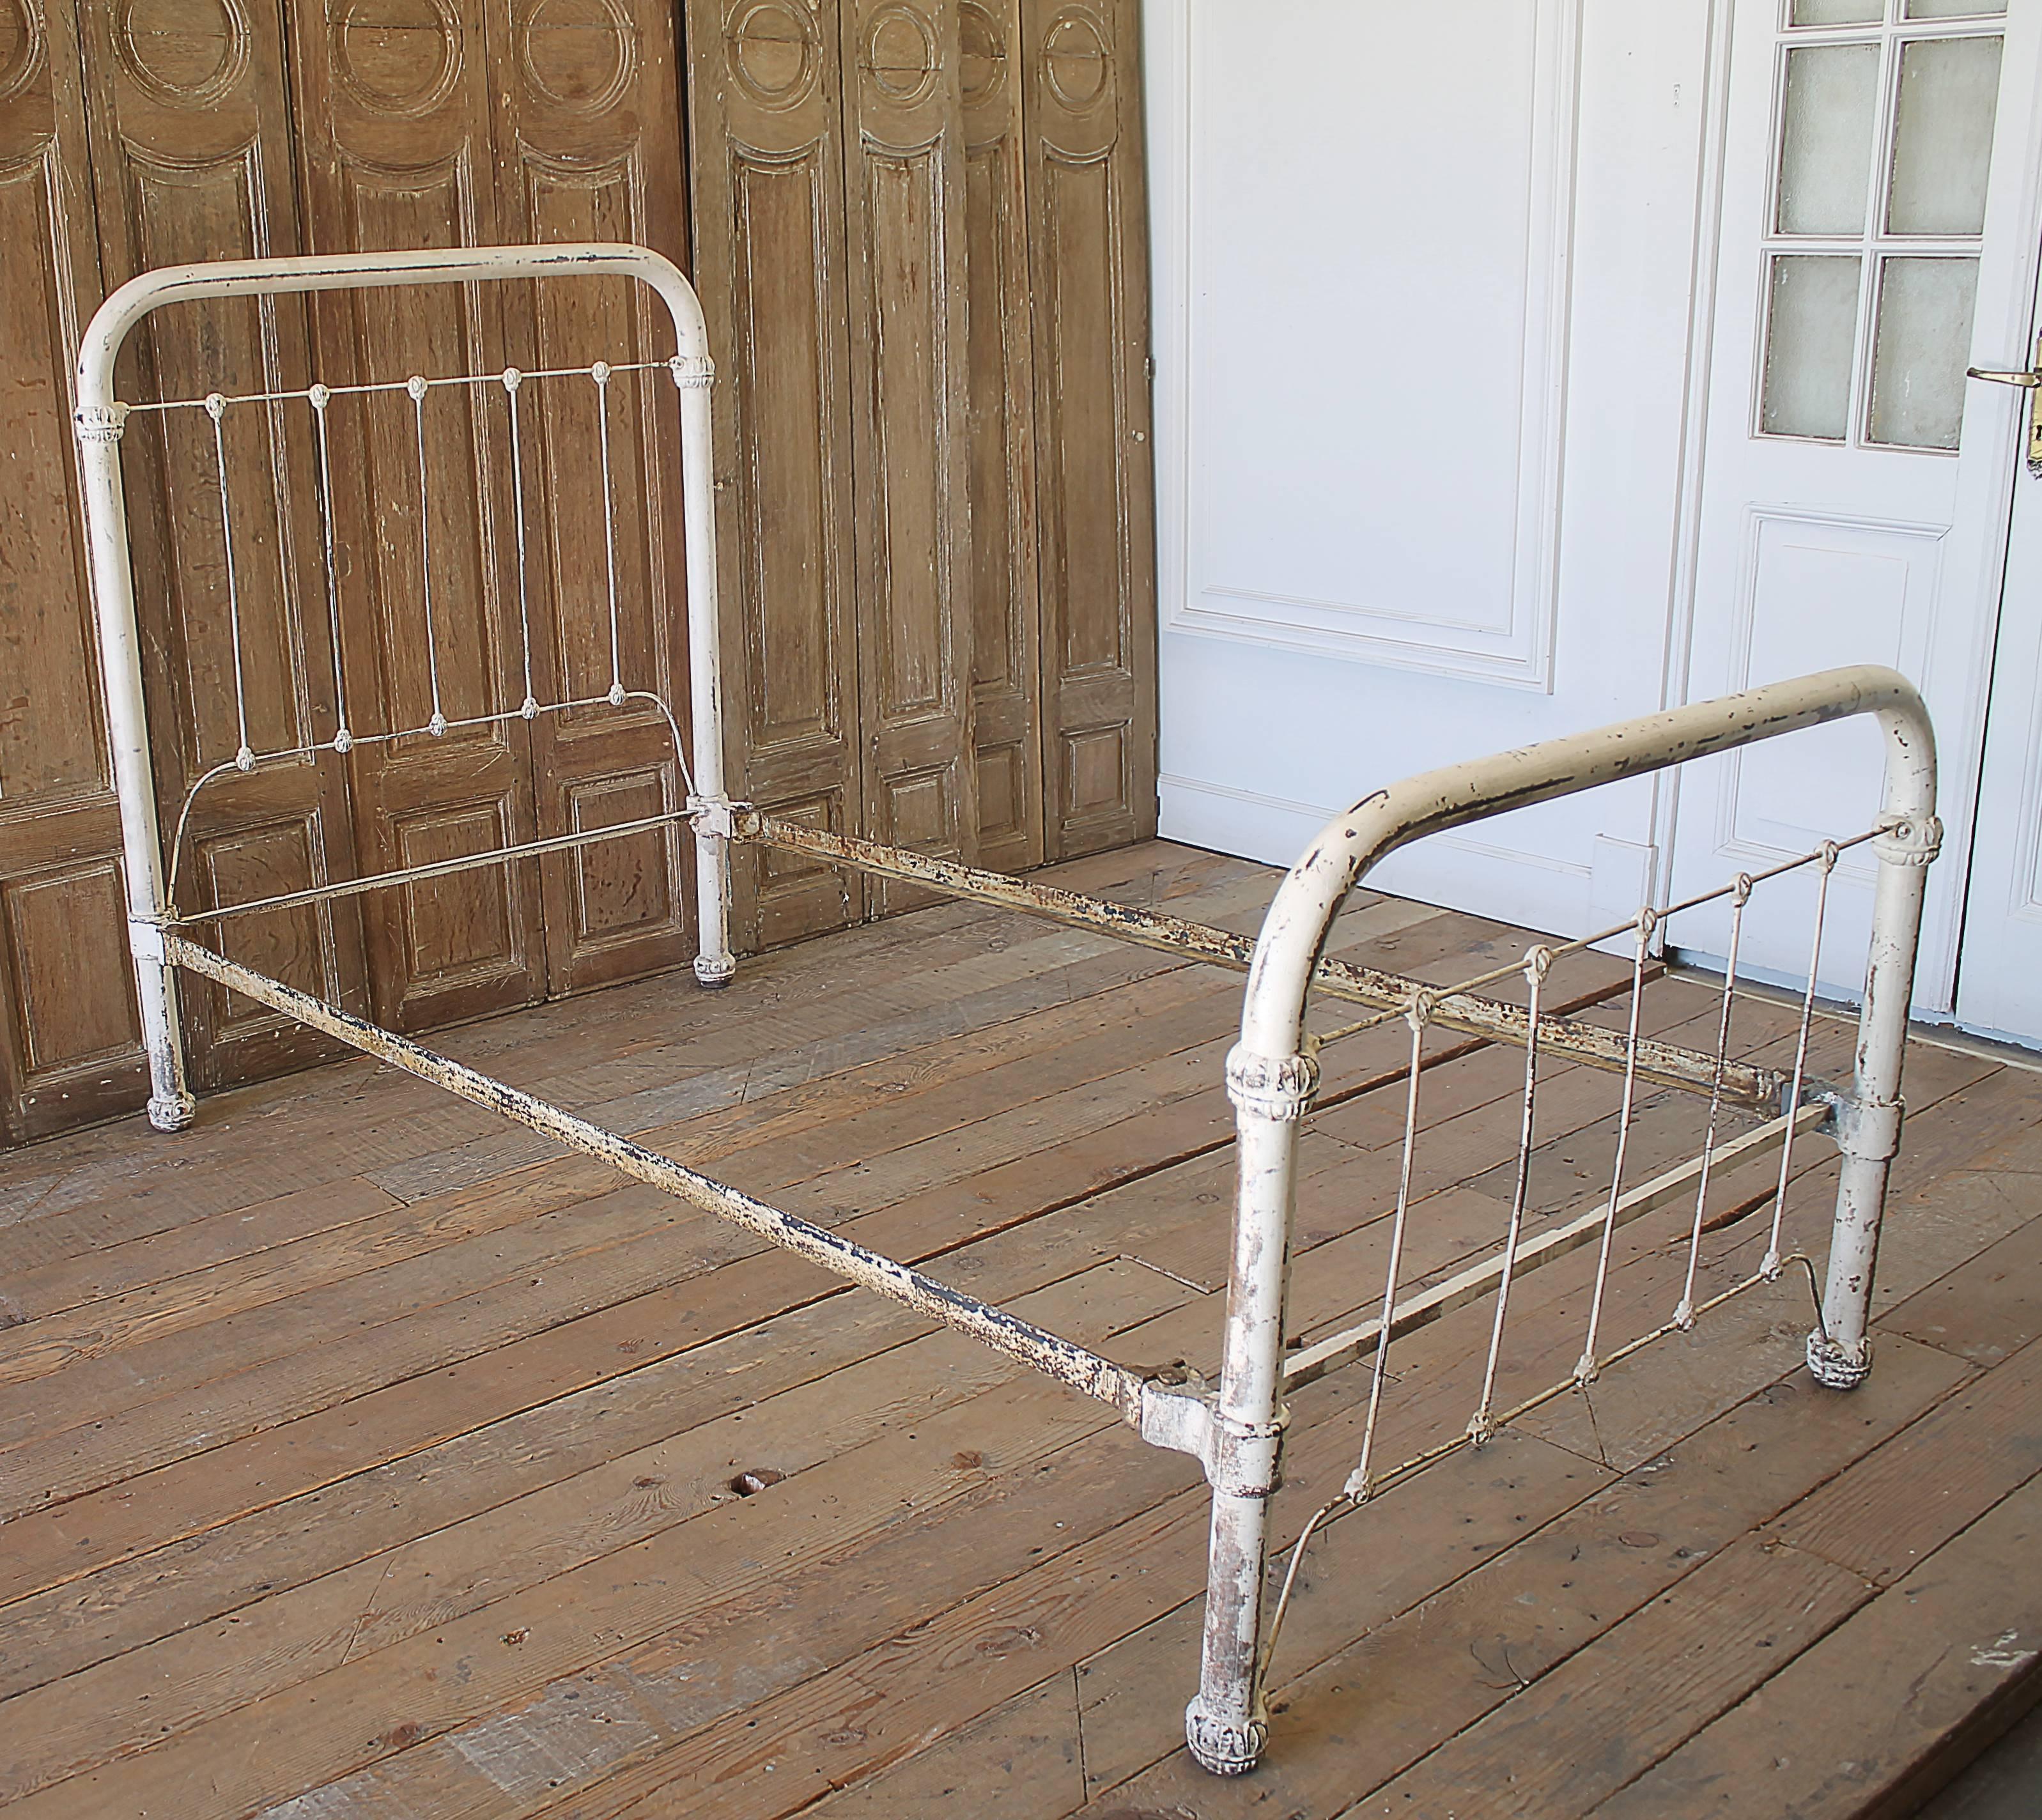 Antique wrought Iron bed in a twin size, with beautiful white paint perfect patina.  A pretty country farmhouse or shabby chic look.
Original rails, easy to assemble, very solid and sturdy. A heavy solid bed.
Twin iron bed measures: 43” w x 49.75”